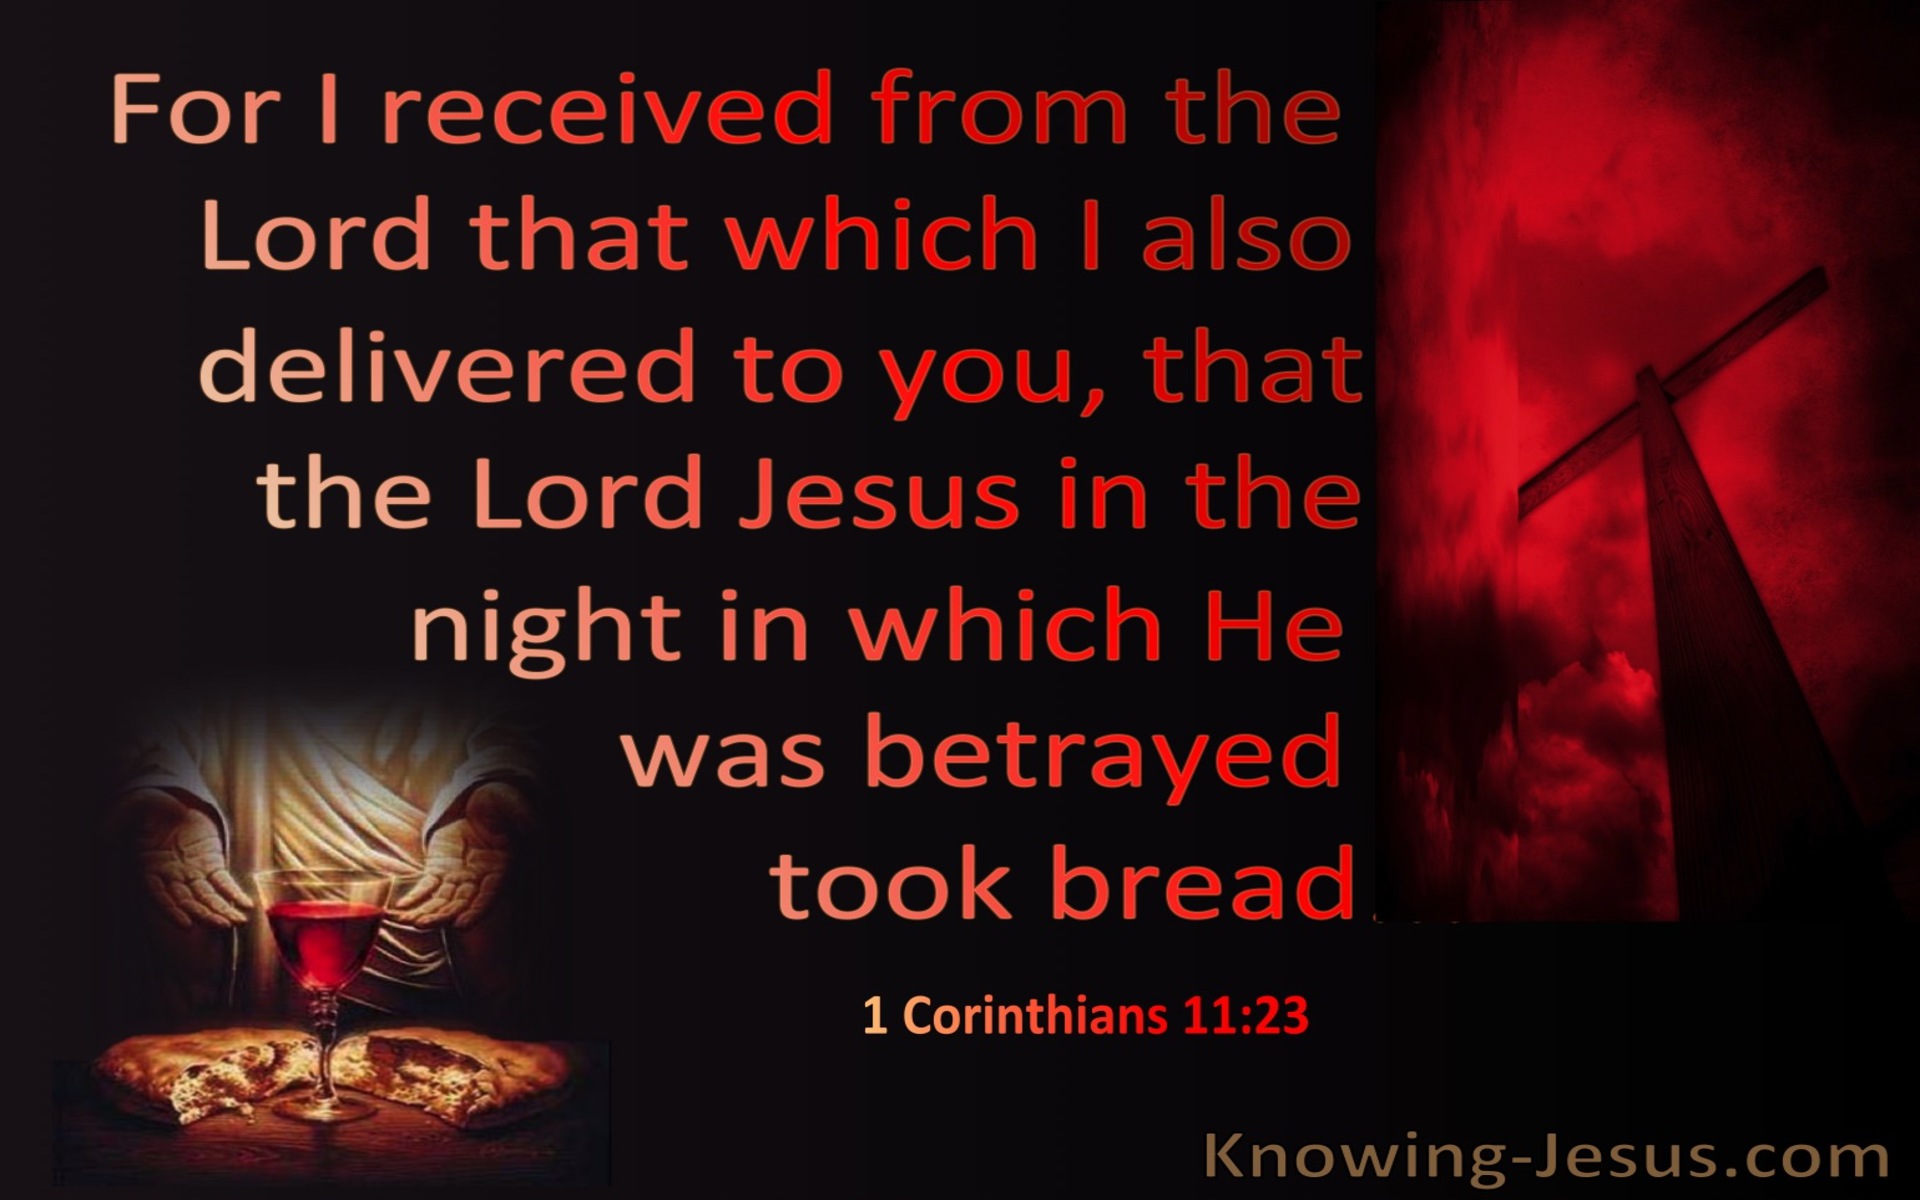 1 Corinthians 11:23 The Night He Was Betrayed Jesus Took Bread (red)